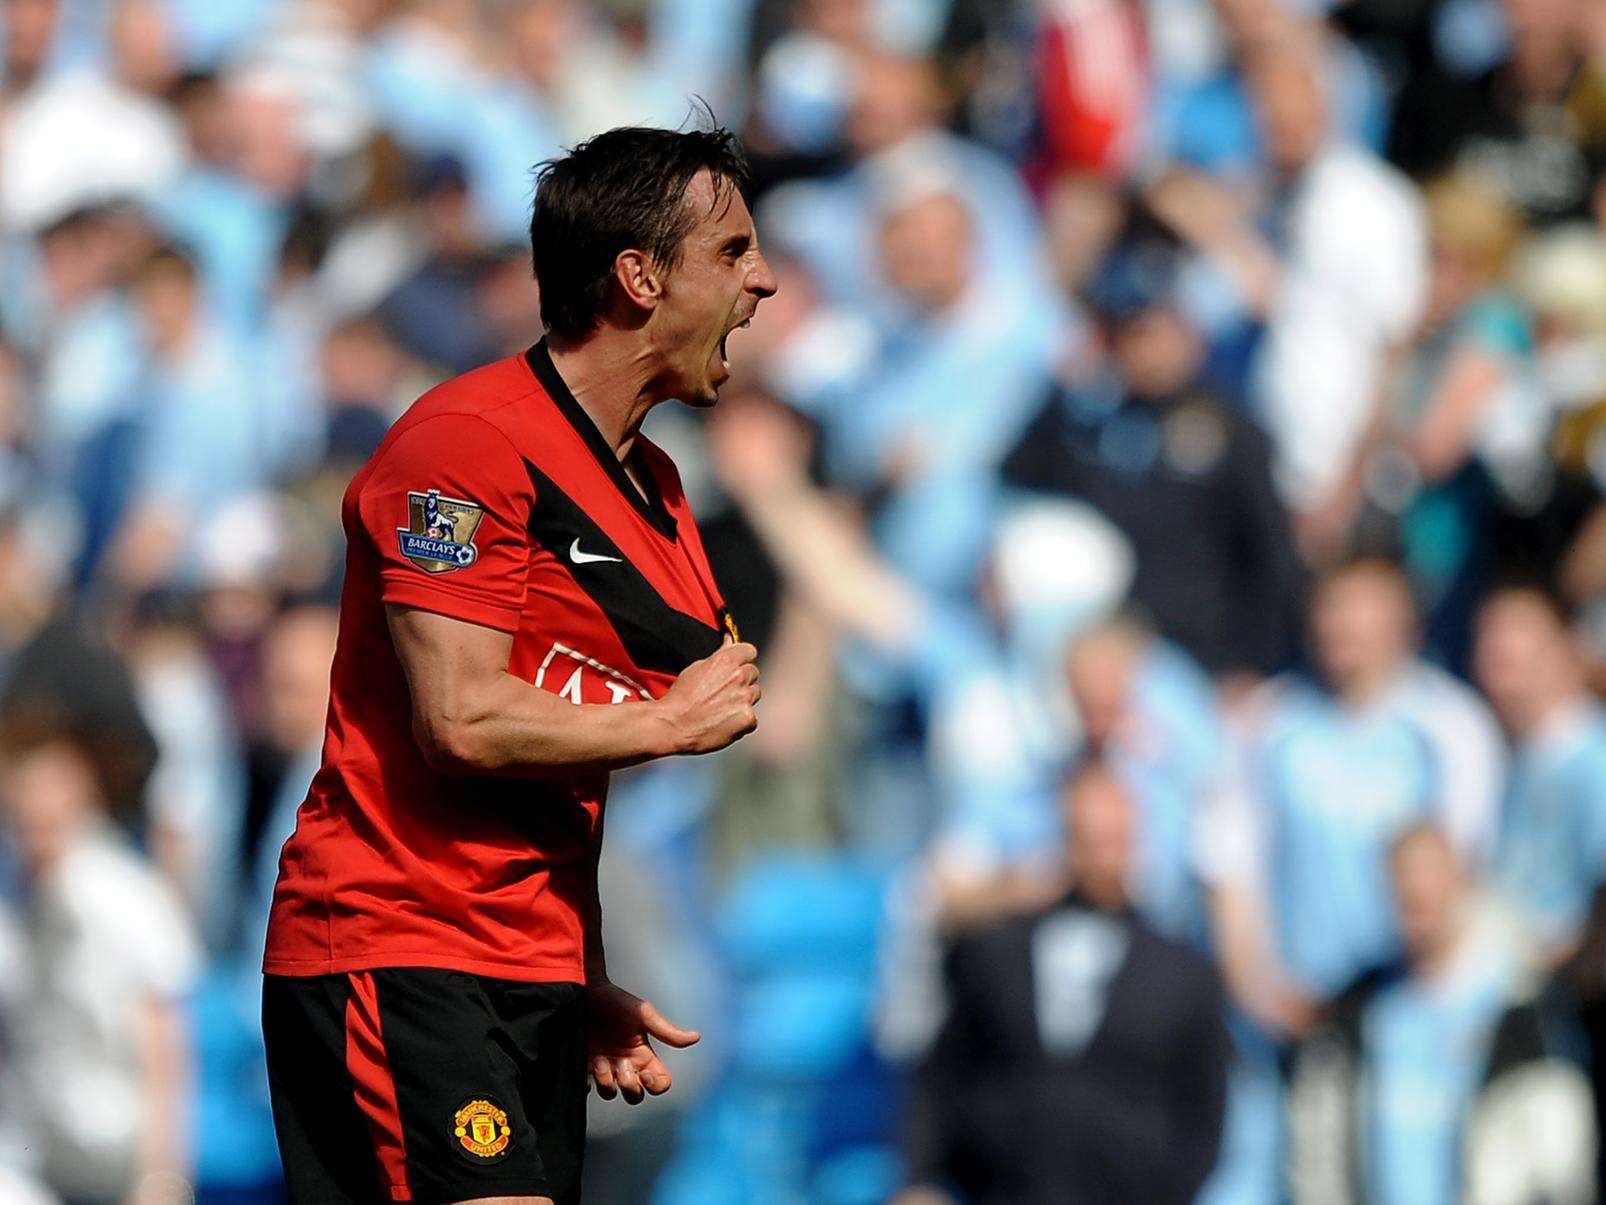 Now excelling as pundit, Neville was one of the most reliable right-backs around back in his playing days. He made 400 Premier League appearances, all for Manchester United, bagging eight league titles.